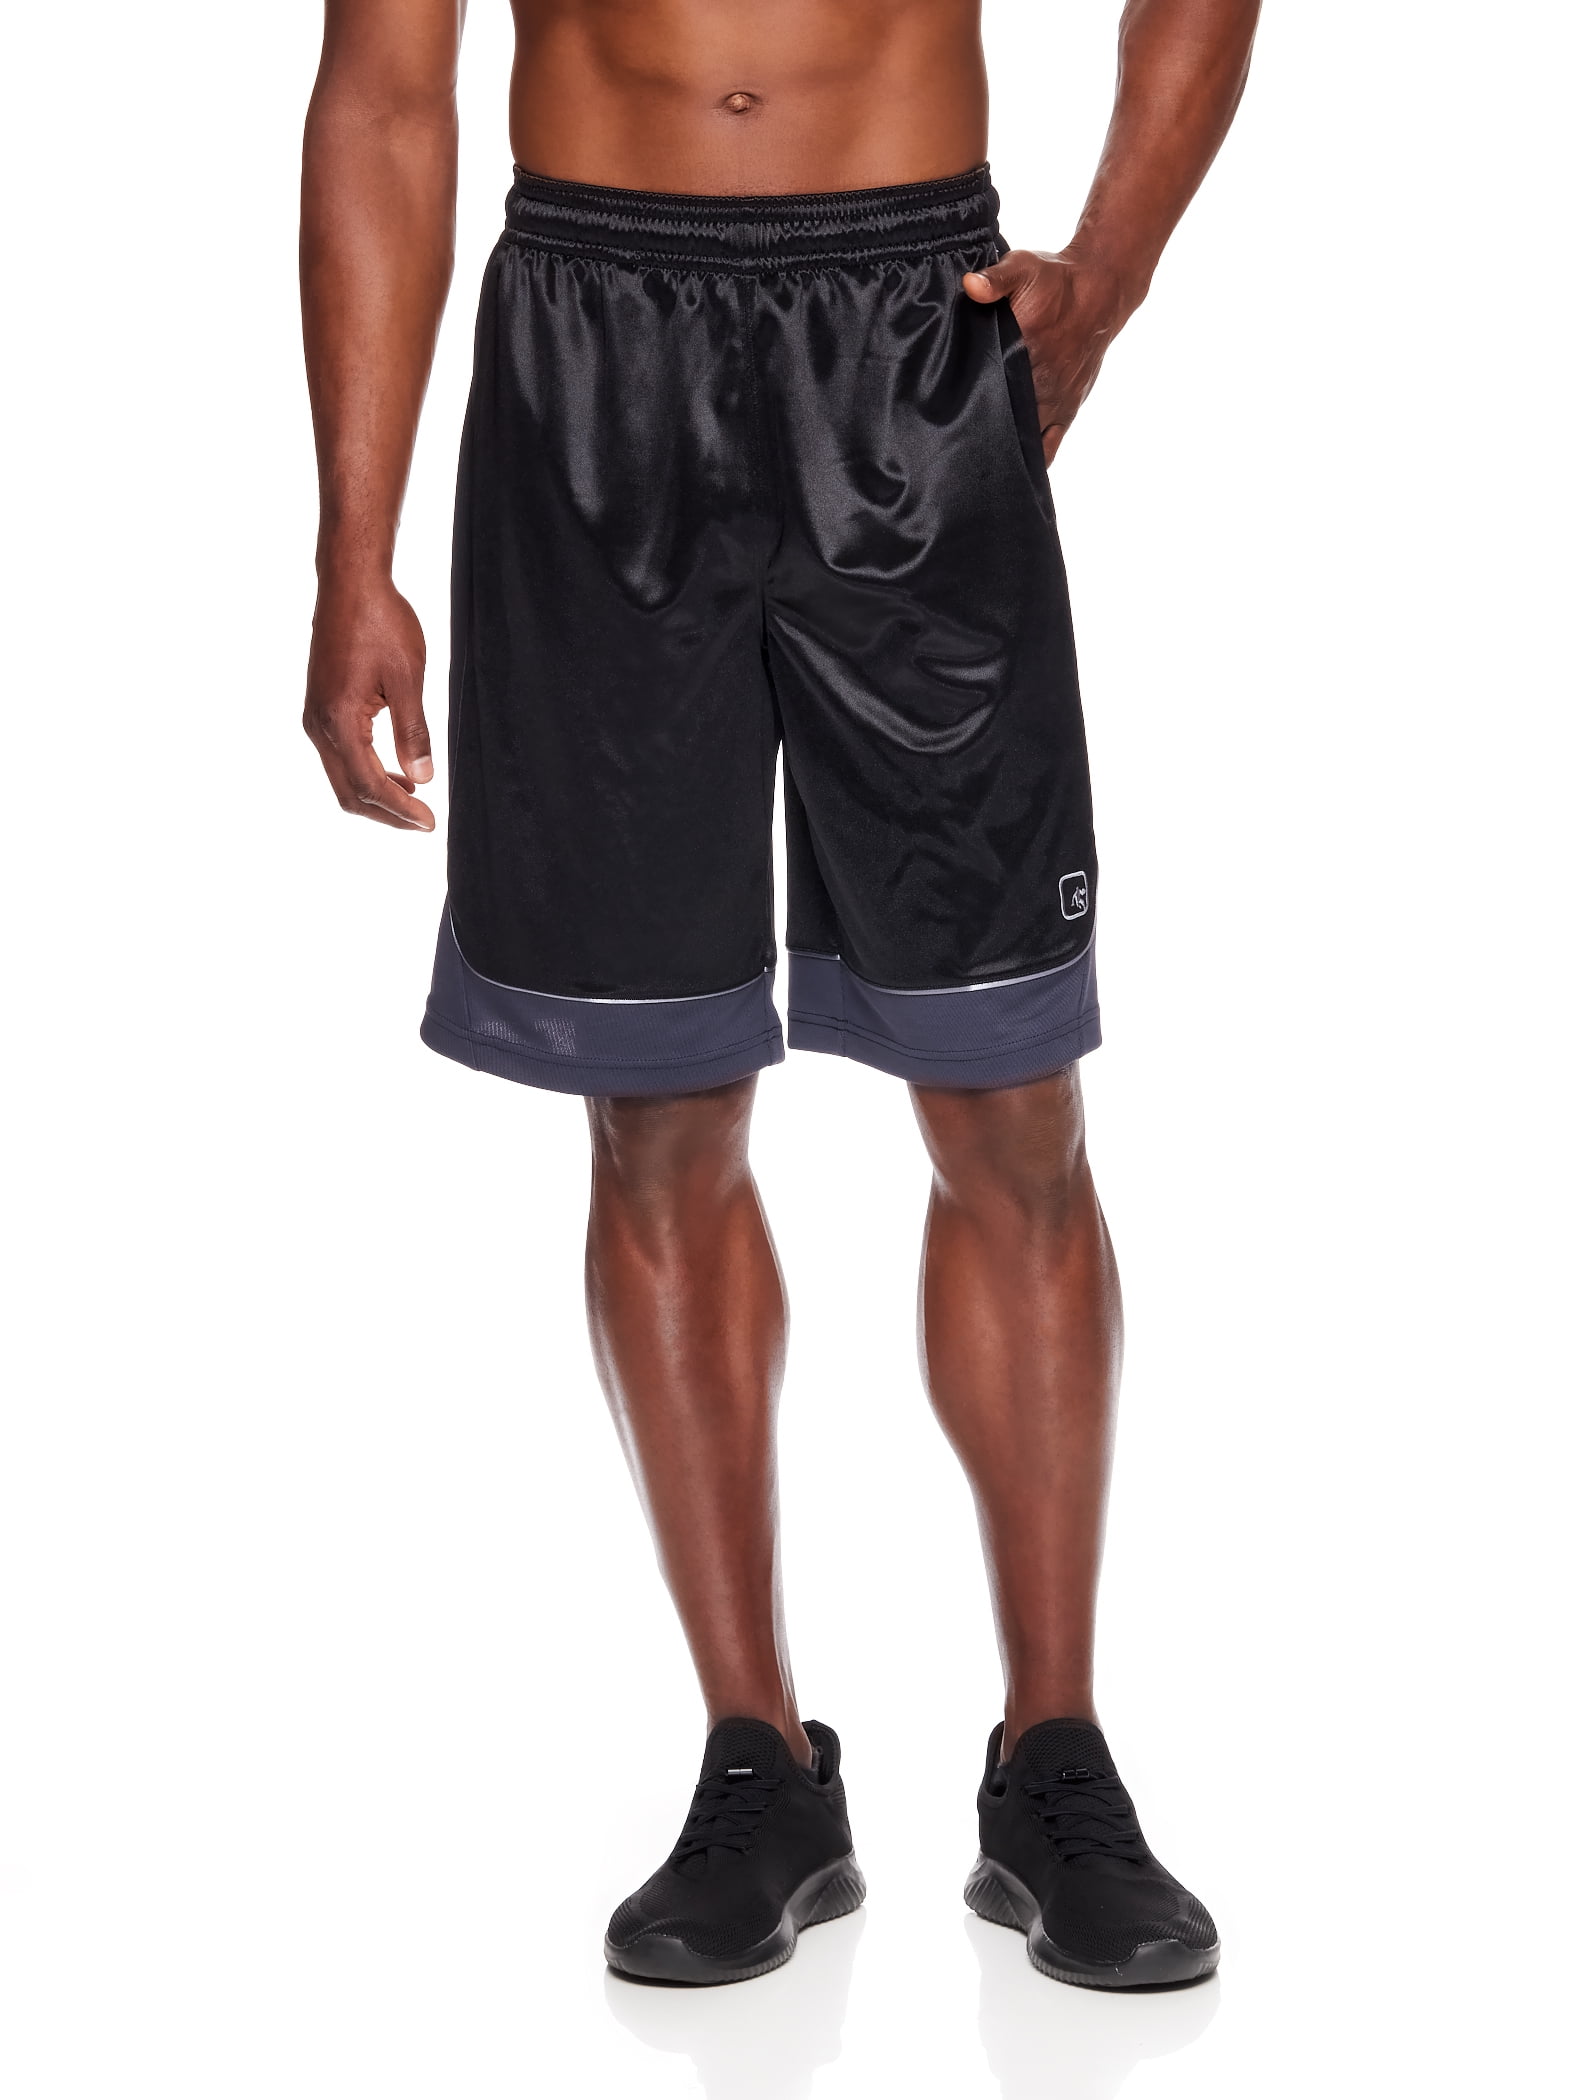 AND1 Men's and Big Men's Active All Courts 11" Basketball Shorts, Up To Size 5XL